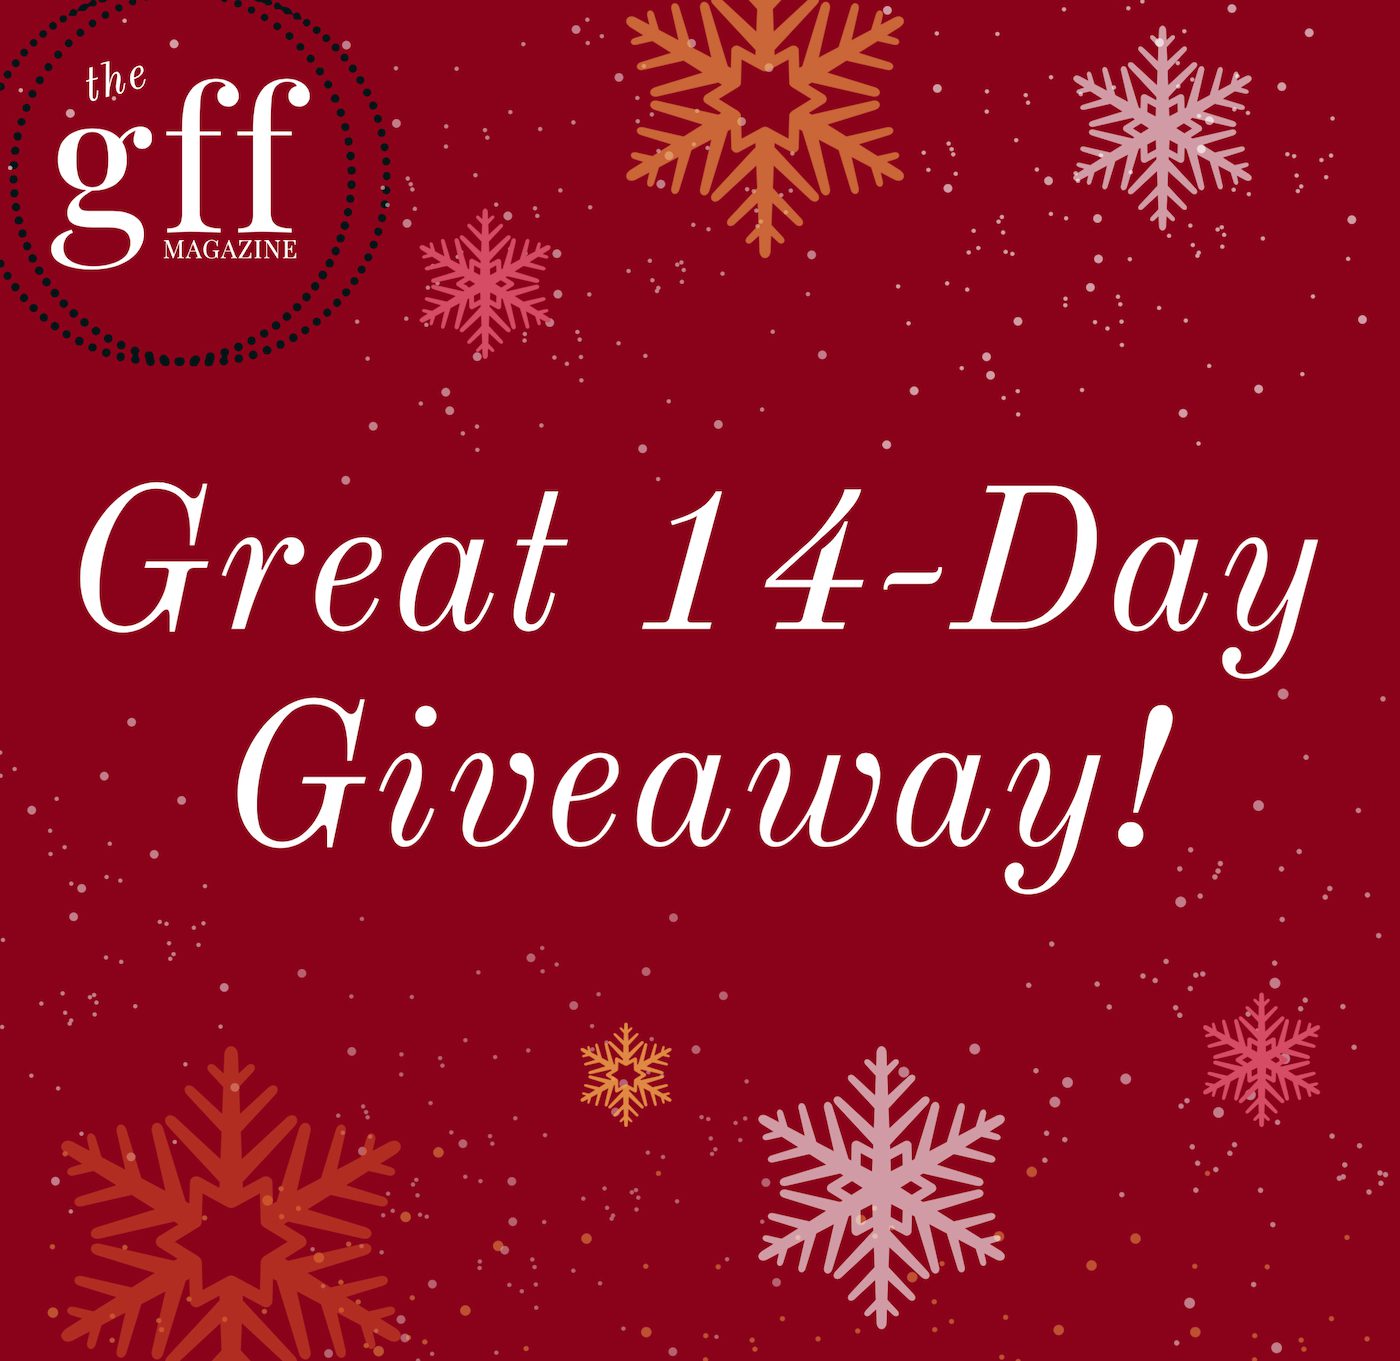 GFF Magazine's 2021 Great 14-Day Giveaway